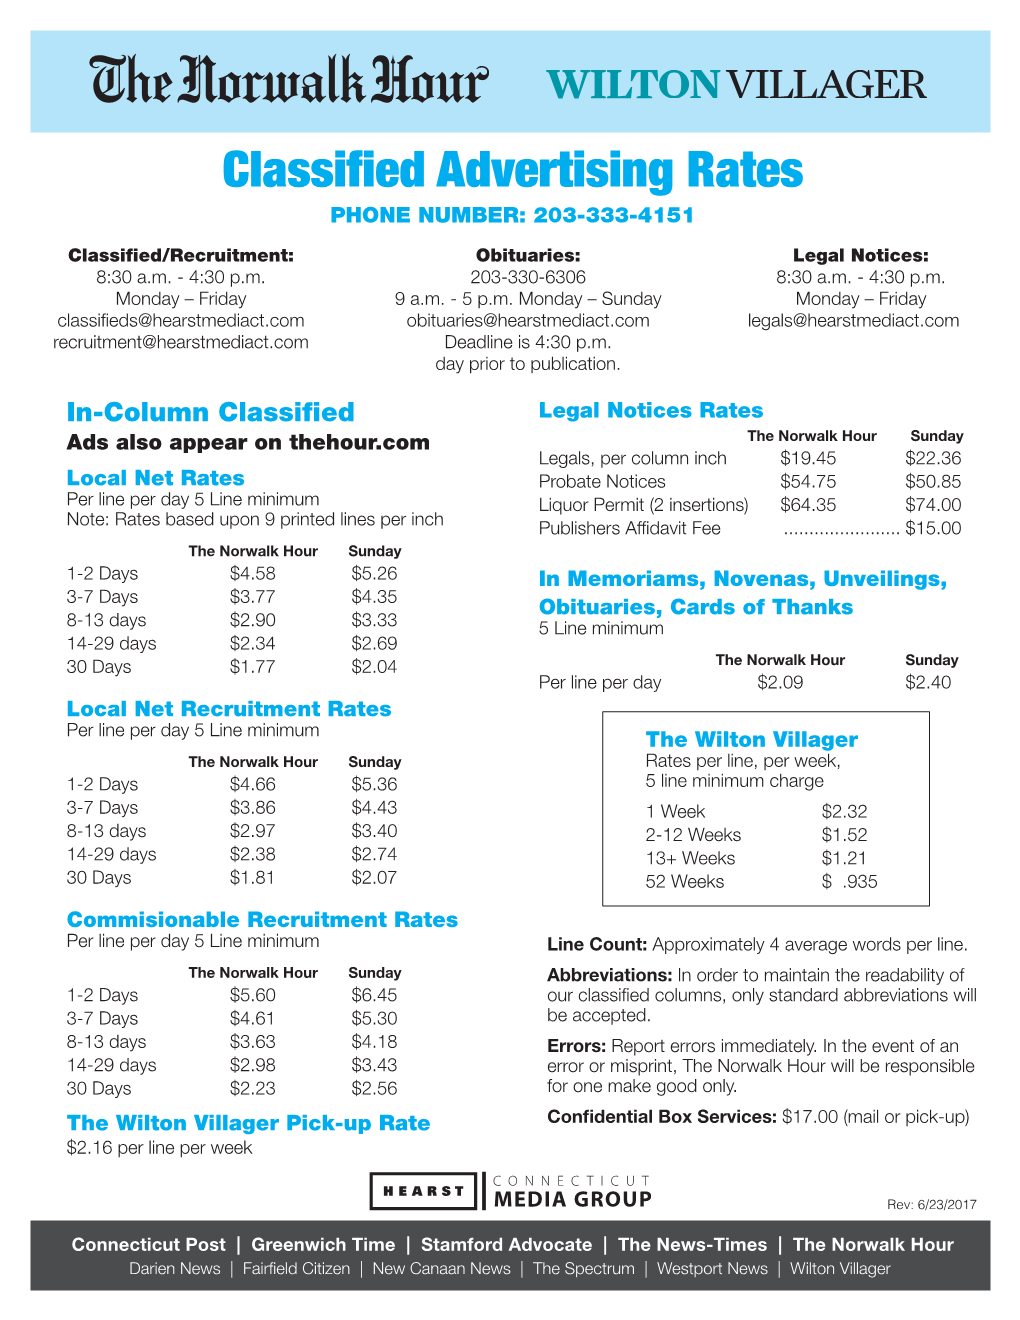 Classified Advertising Rates PHONE NUMBER: 203-333-4151